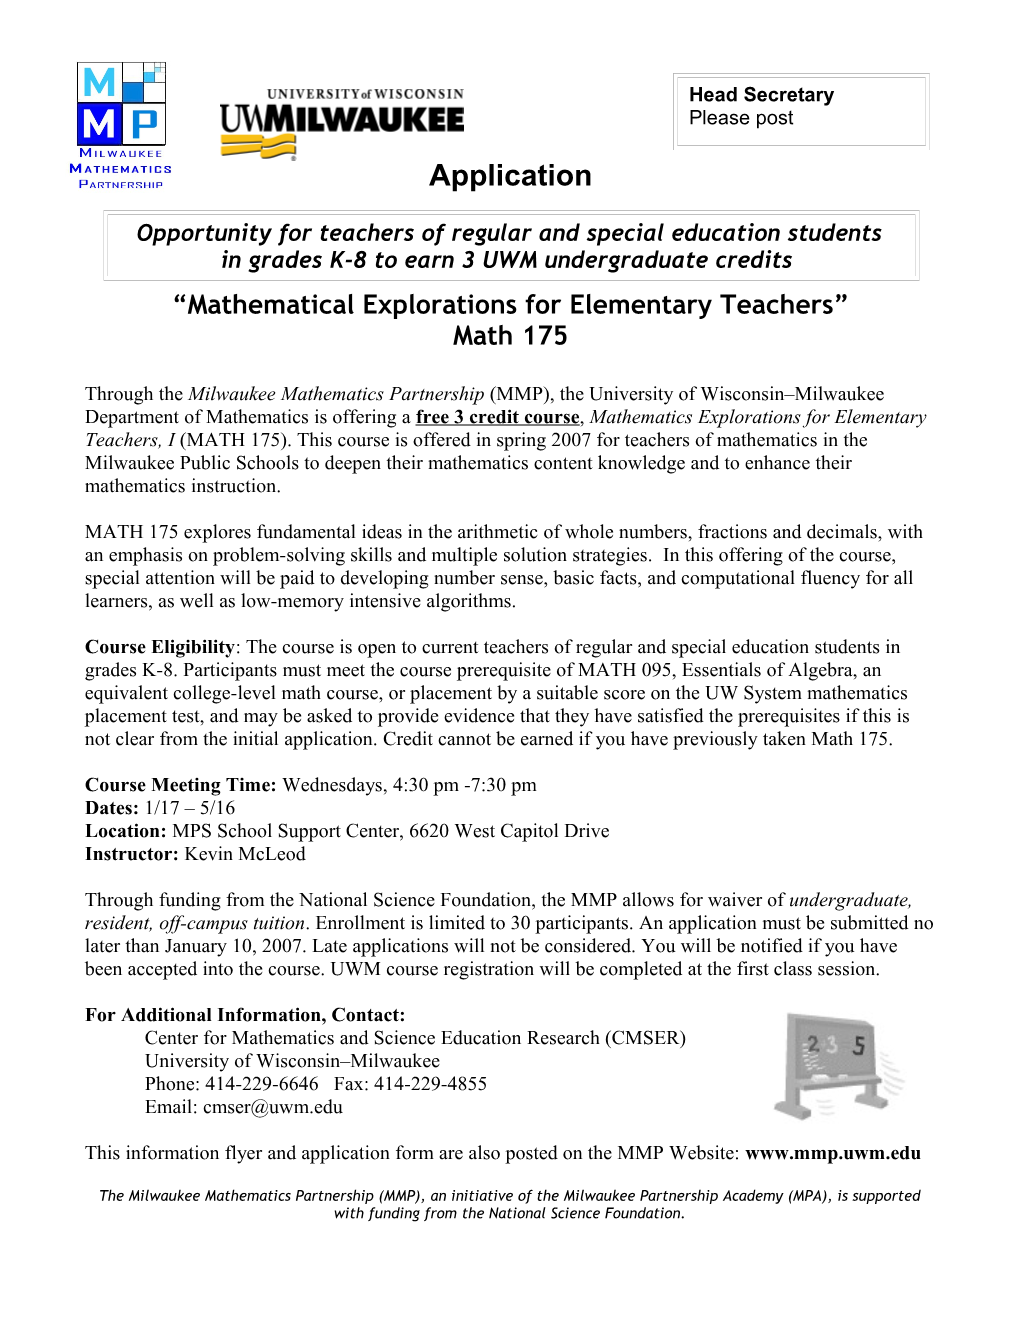 Opportunity for Teachers of Regular and Special Education Students